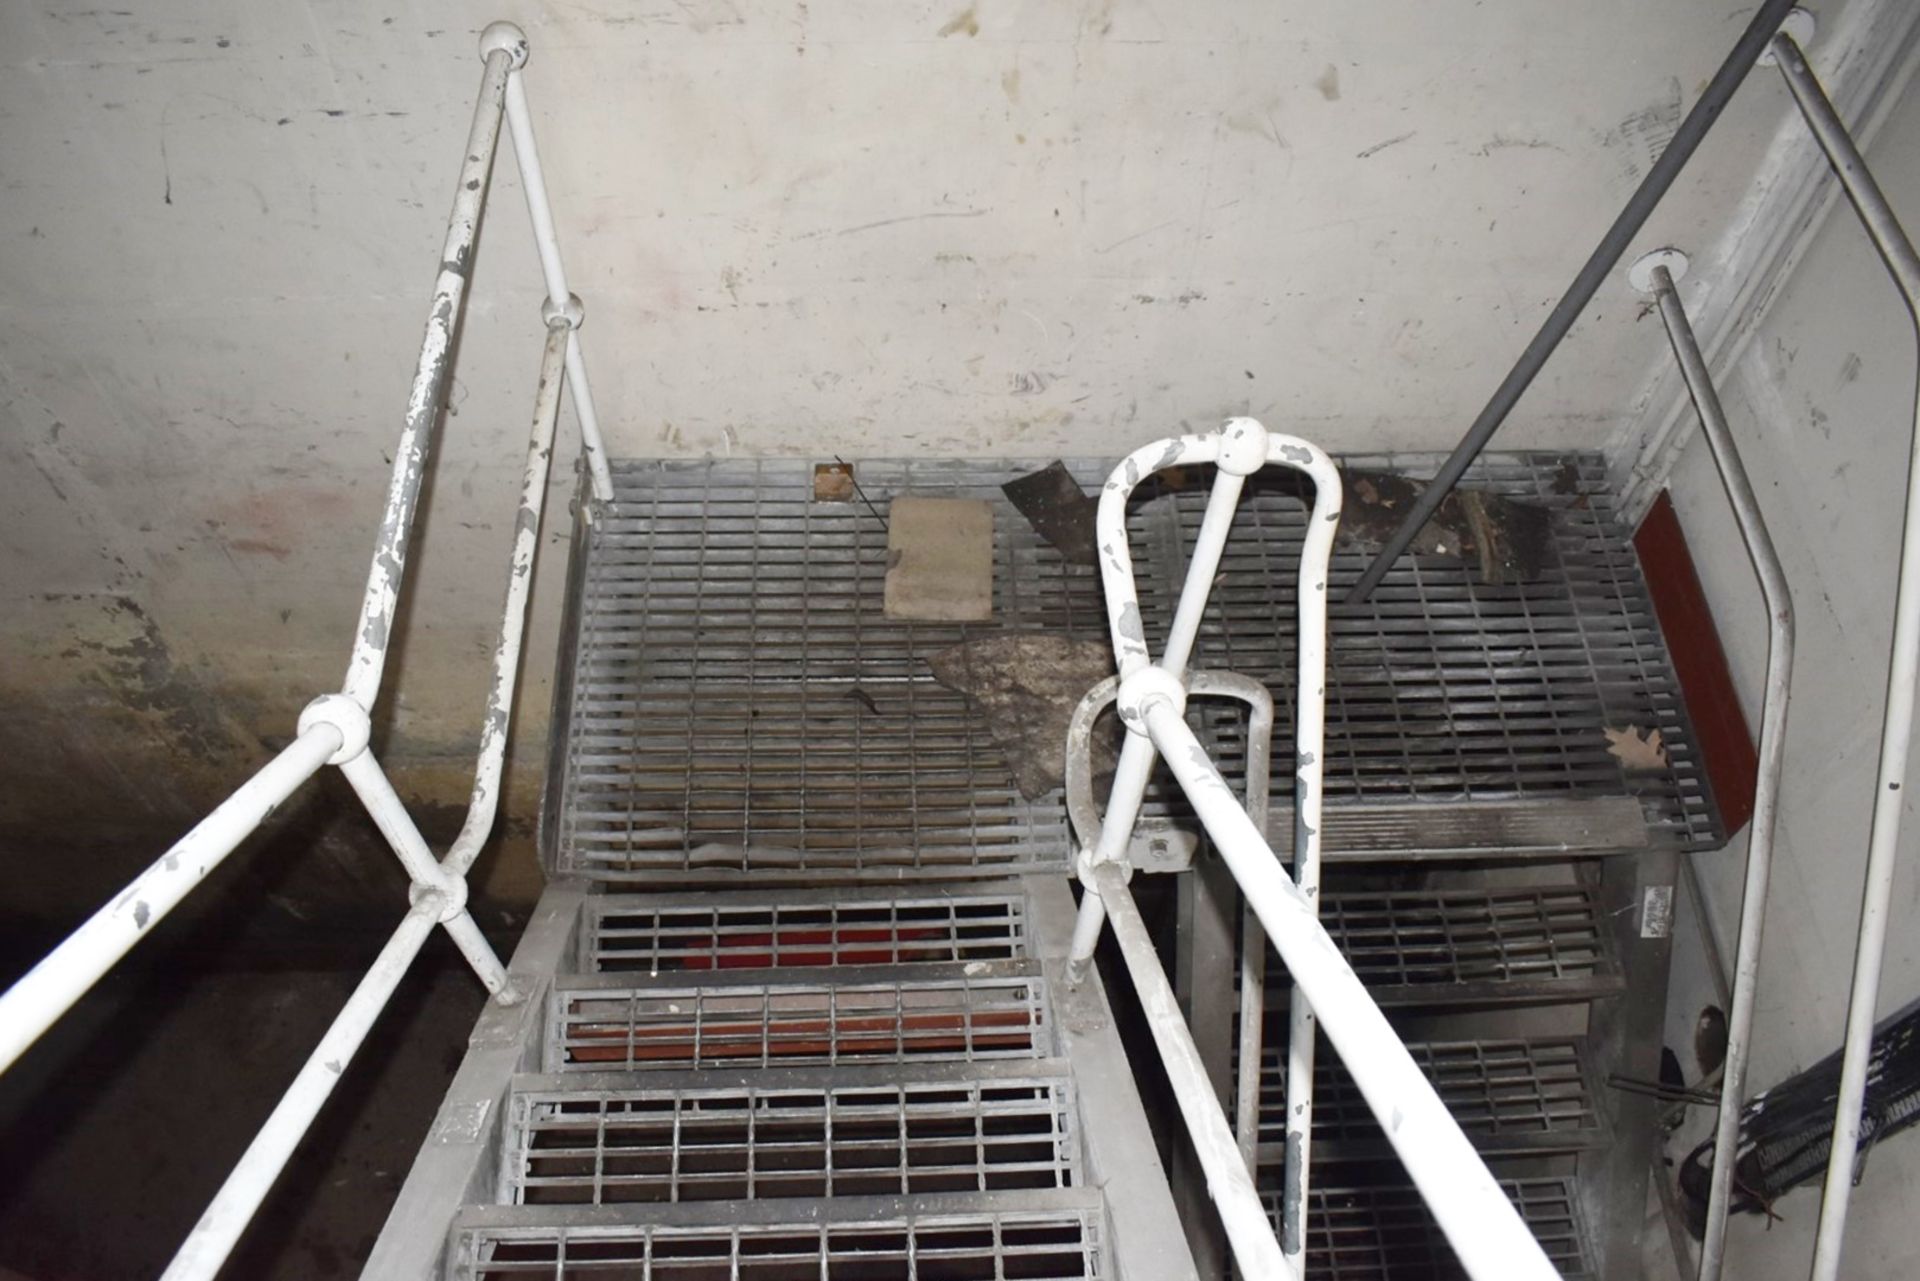 1 x Steel Staircase With Hand Rails, Perforated Steps and Platform - Approx Dimensions: Overall - Image 3 of 4